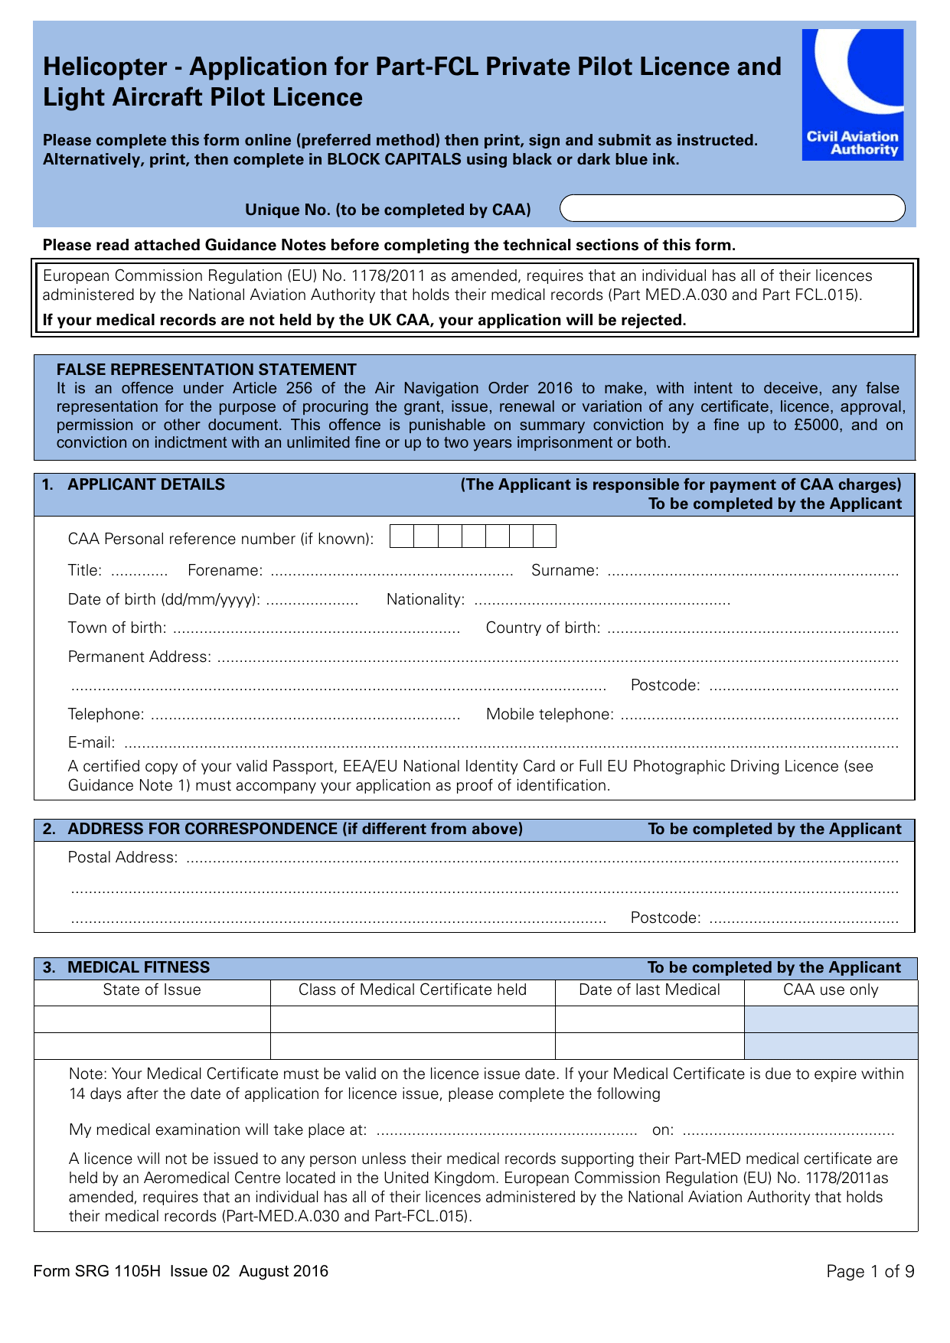 Form SRG1105H Helicopter - Application for Part-Fcl Private Pilot Licence and Light Aircraft Pilot Licence - United Kingdom, Page 1